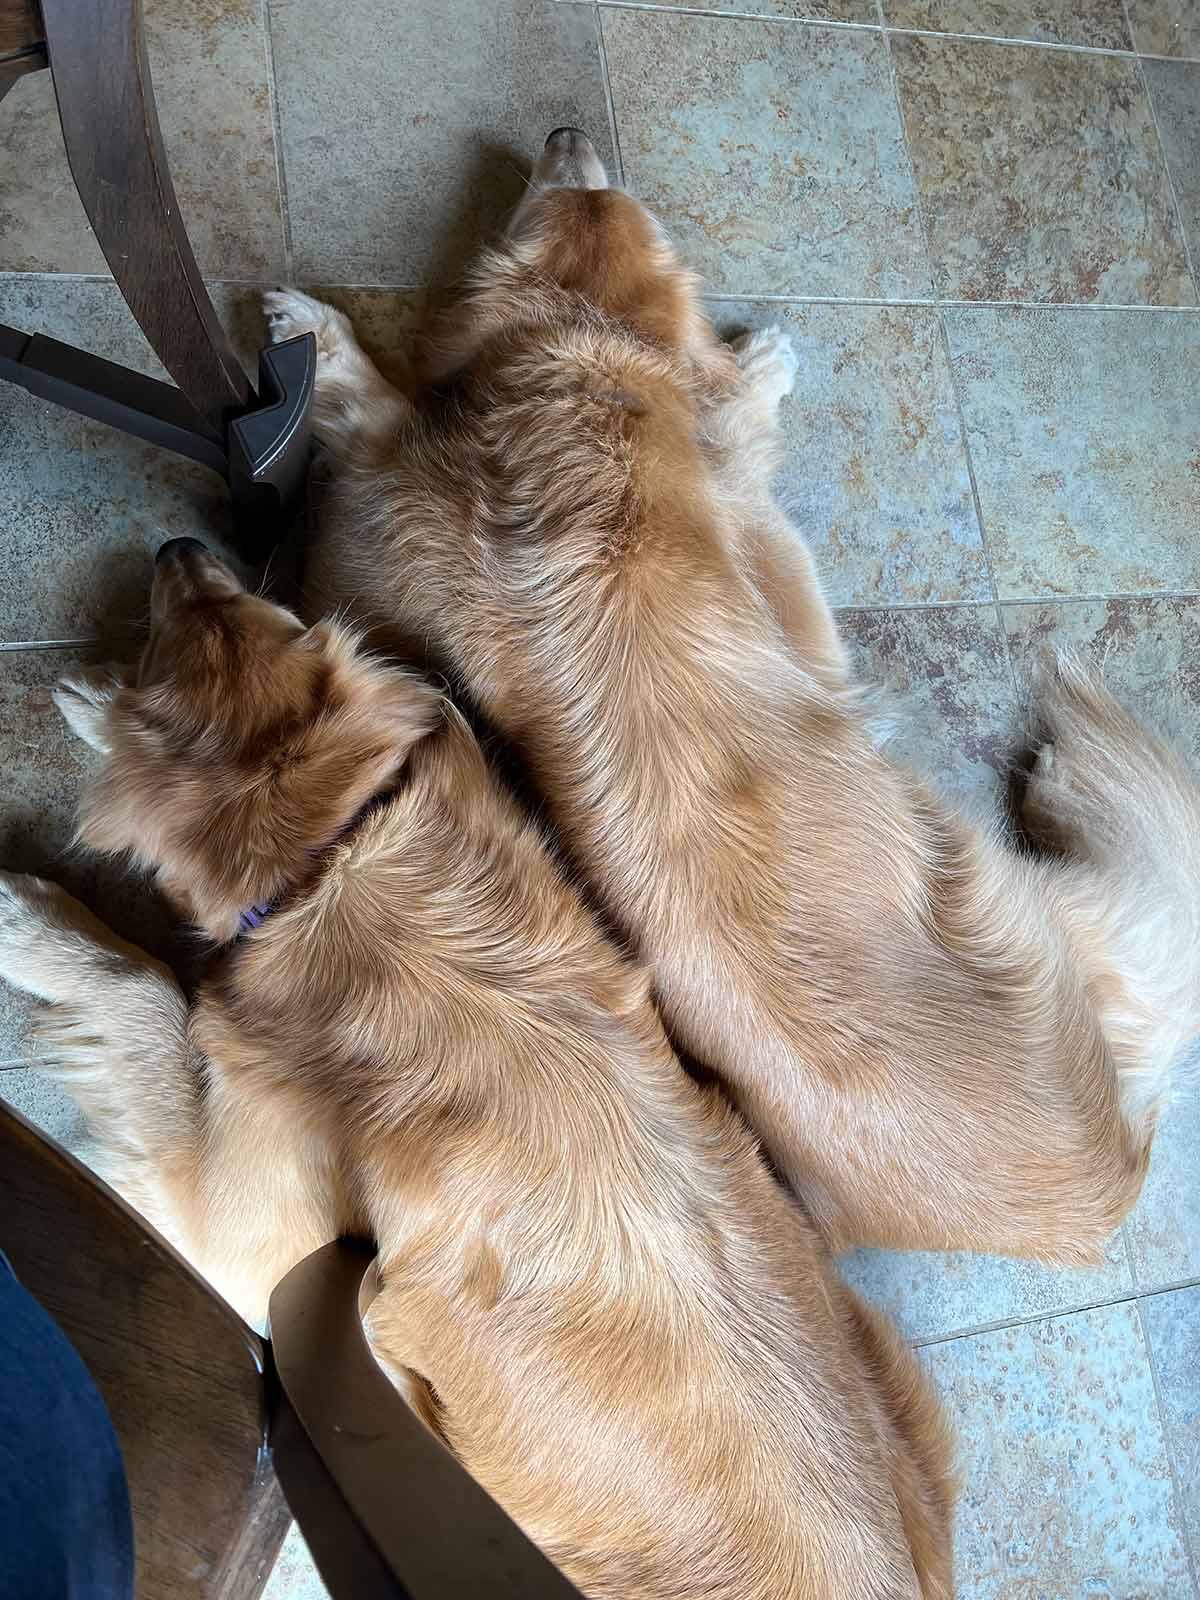 Two dogs laying next to each other on a kitchen floor.